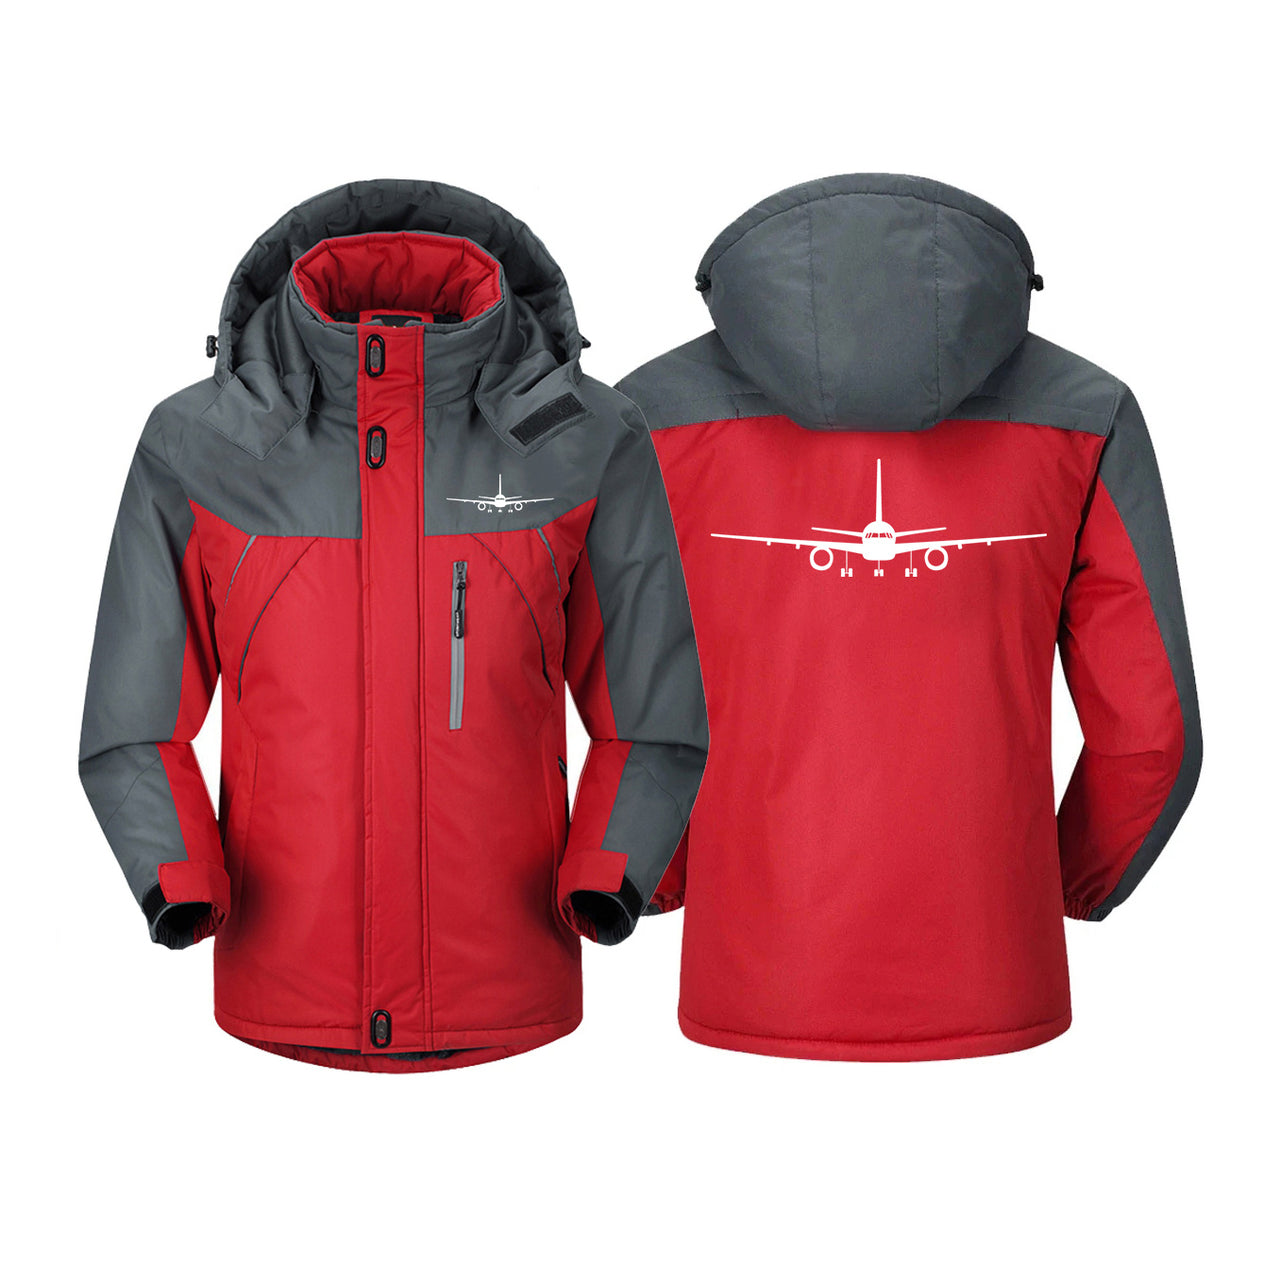 Boeing 757 Silhouette Designed Thick Winter Jackets